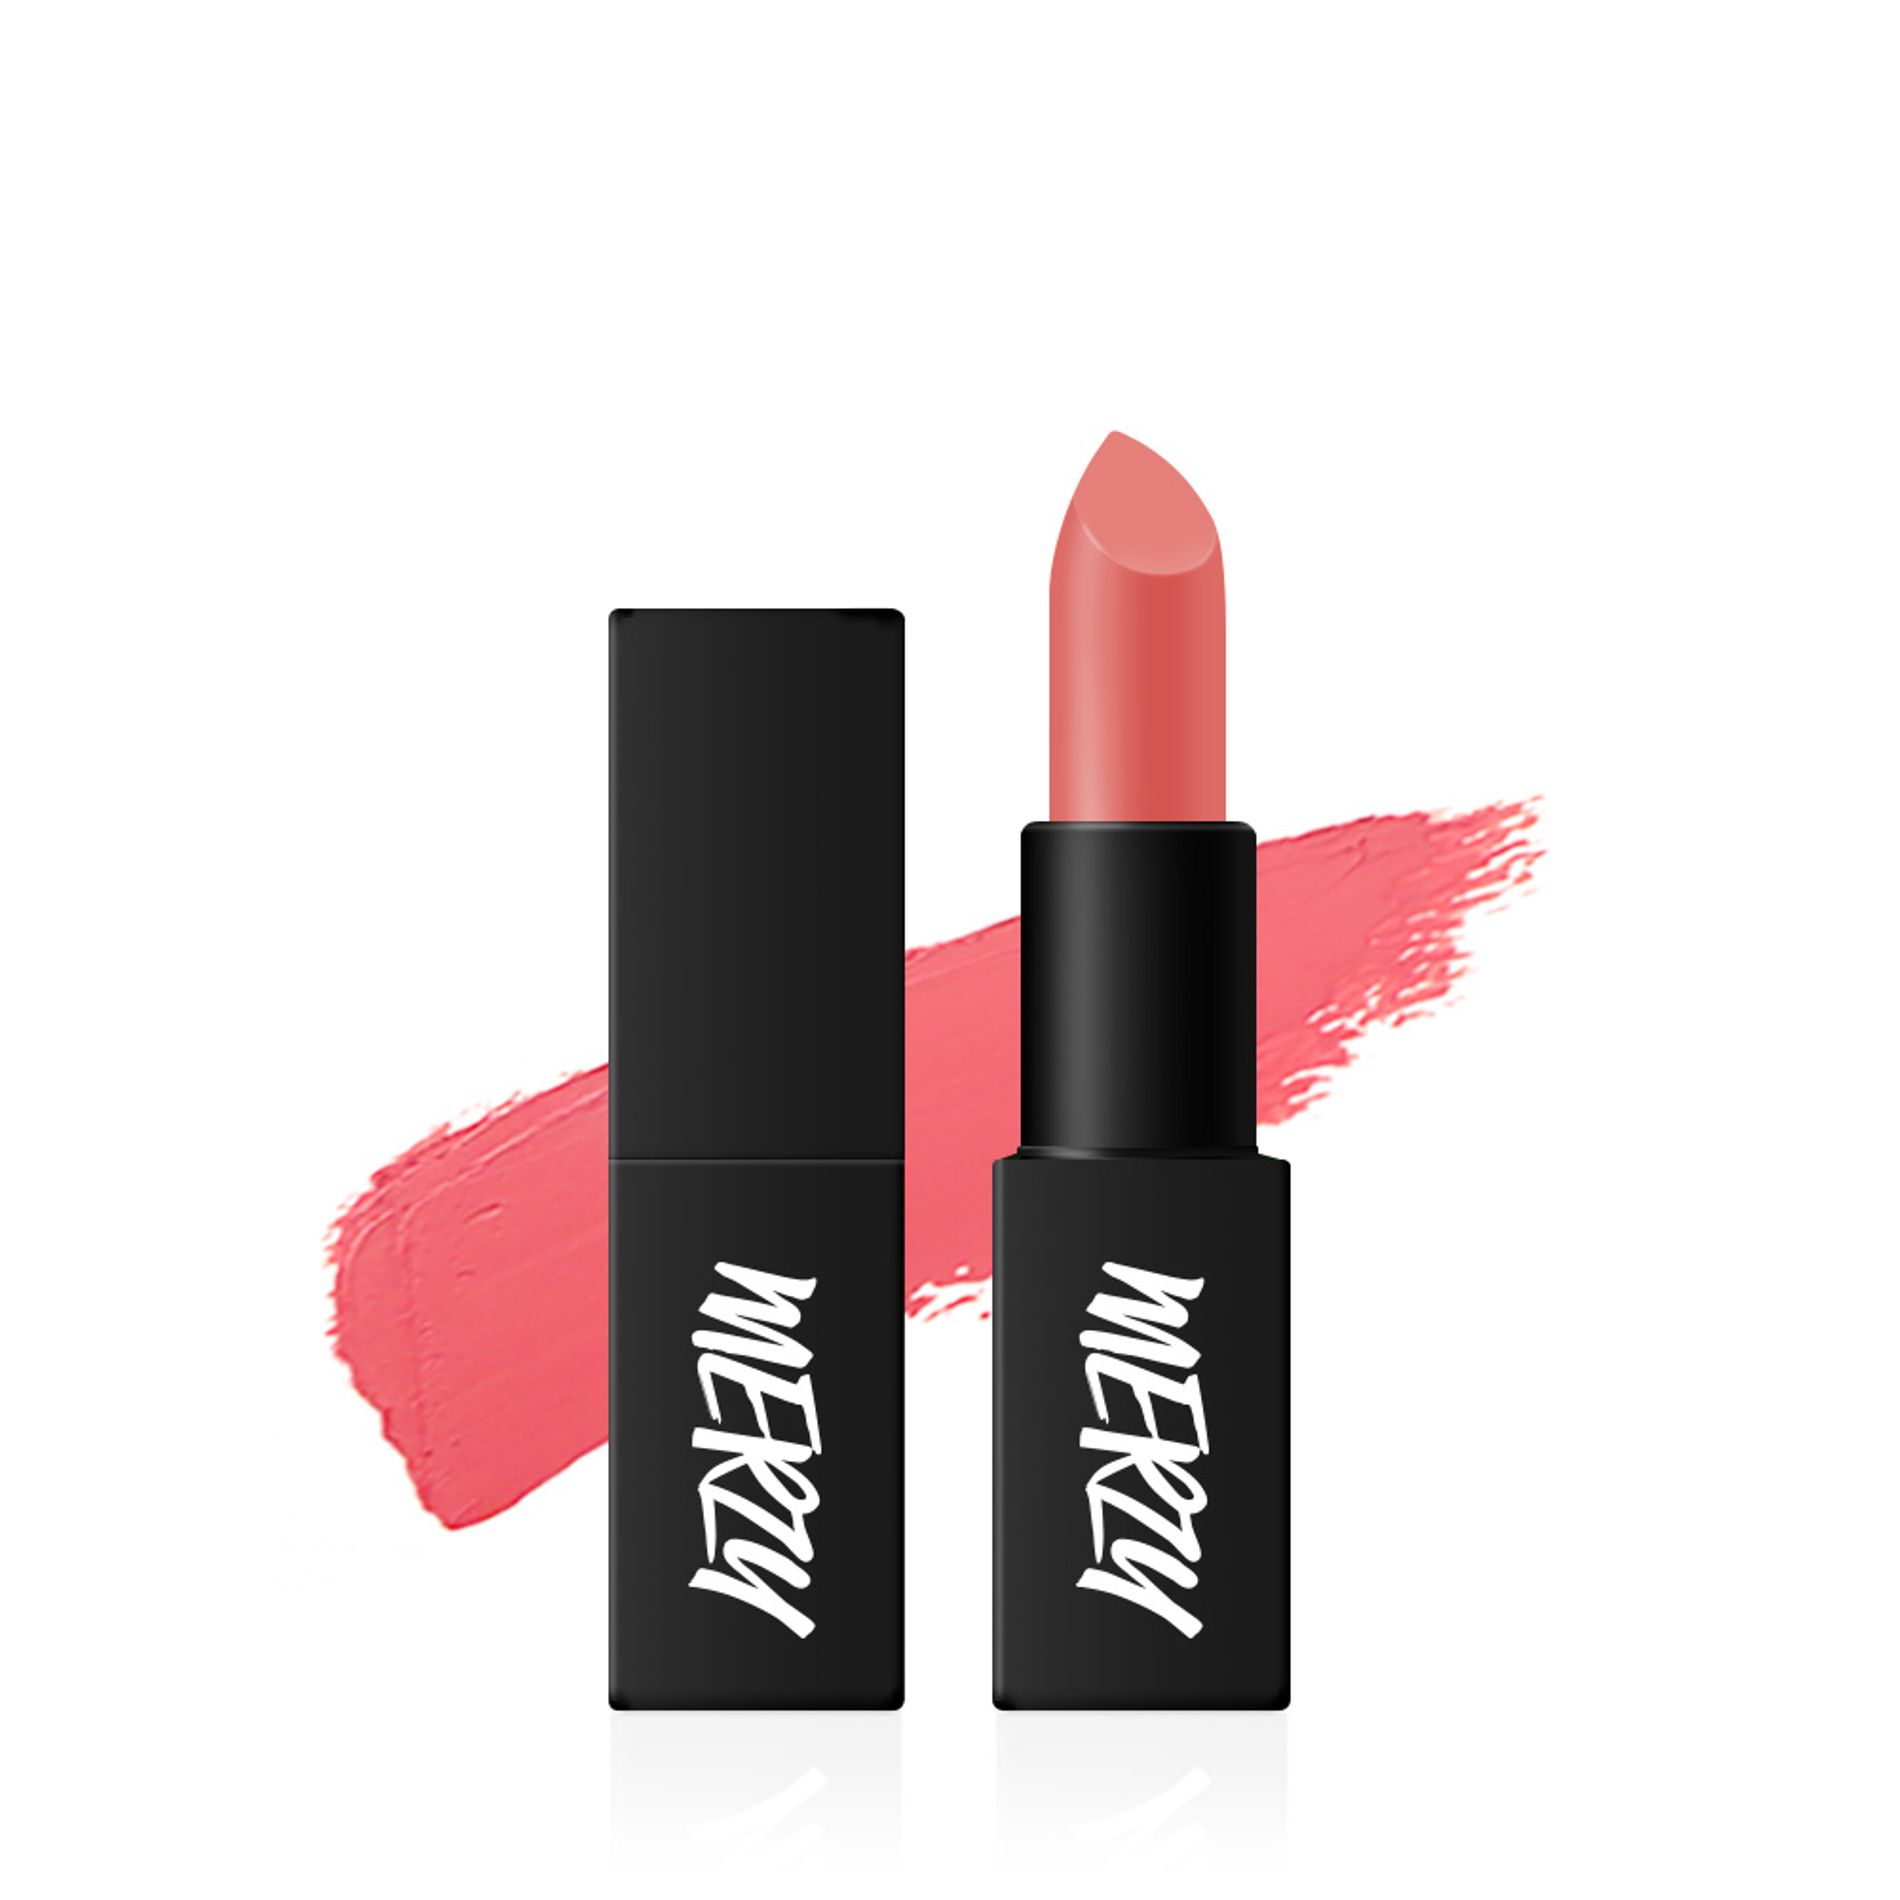 son-thoi-merzy-the-first-lipstick-3-5g-me-series-11